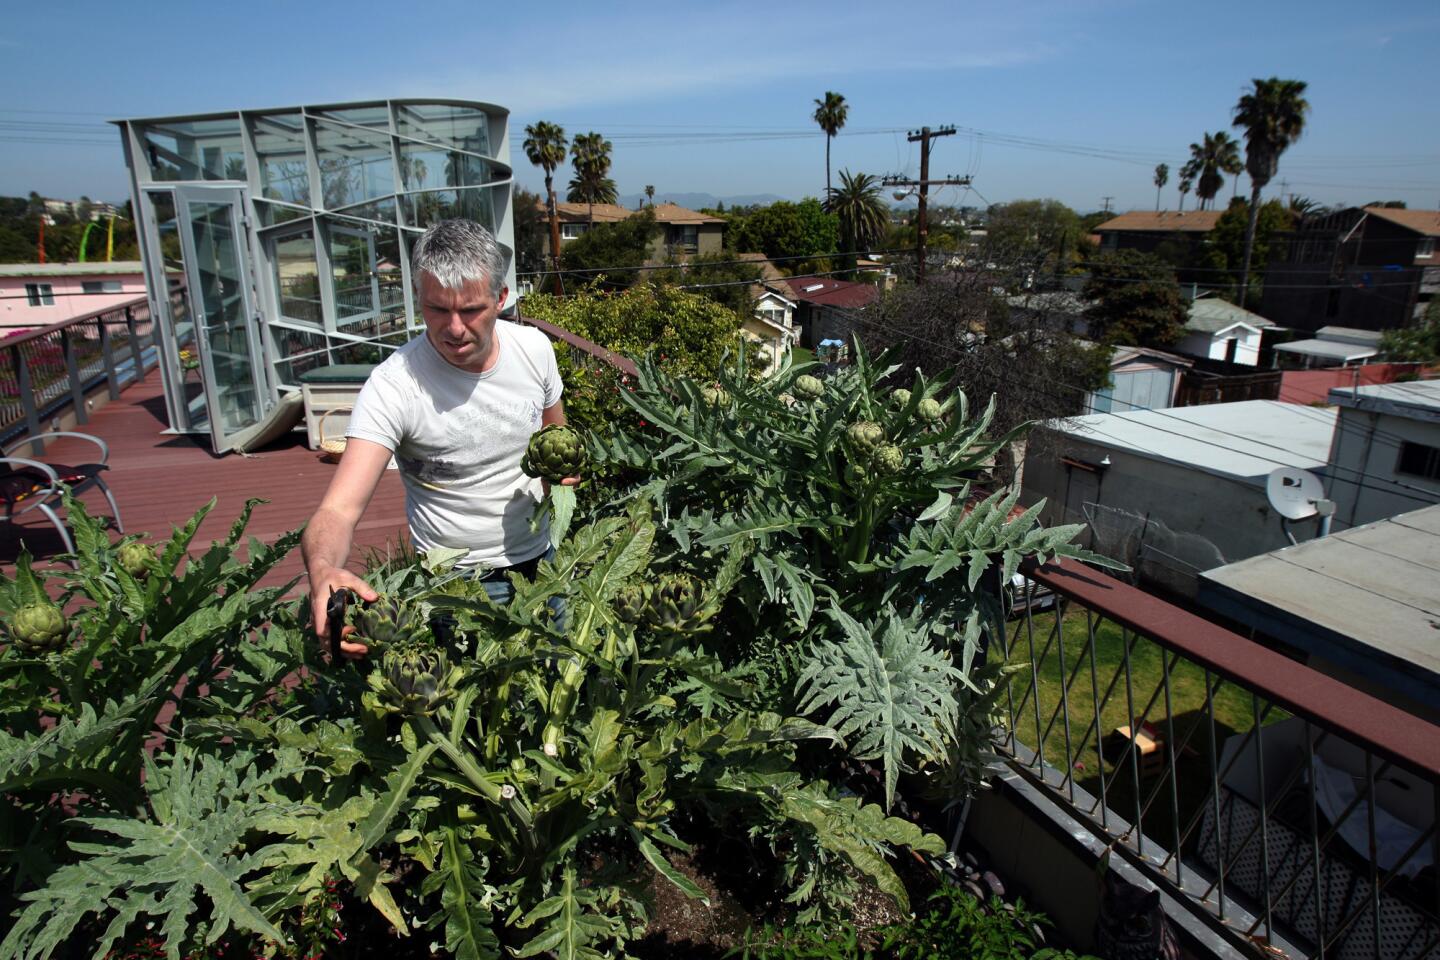 Paul Bricault gathers artichokes from the 3-by-12-foot rooftop vegetable garden of his home in Venice. He grows artichokes, cucumbers, zucchini, tomatoes, peppers, celery, parsley, blueberries, raspberries, strawberries, plus a lemon and orange tree.